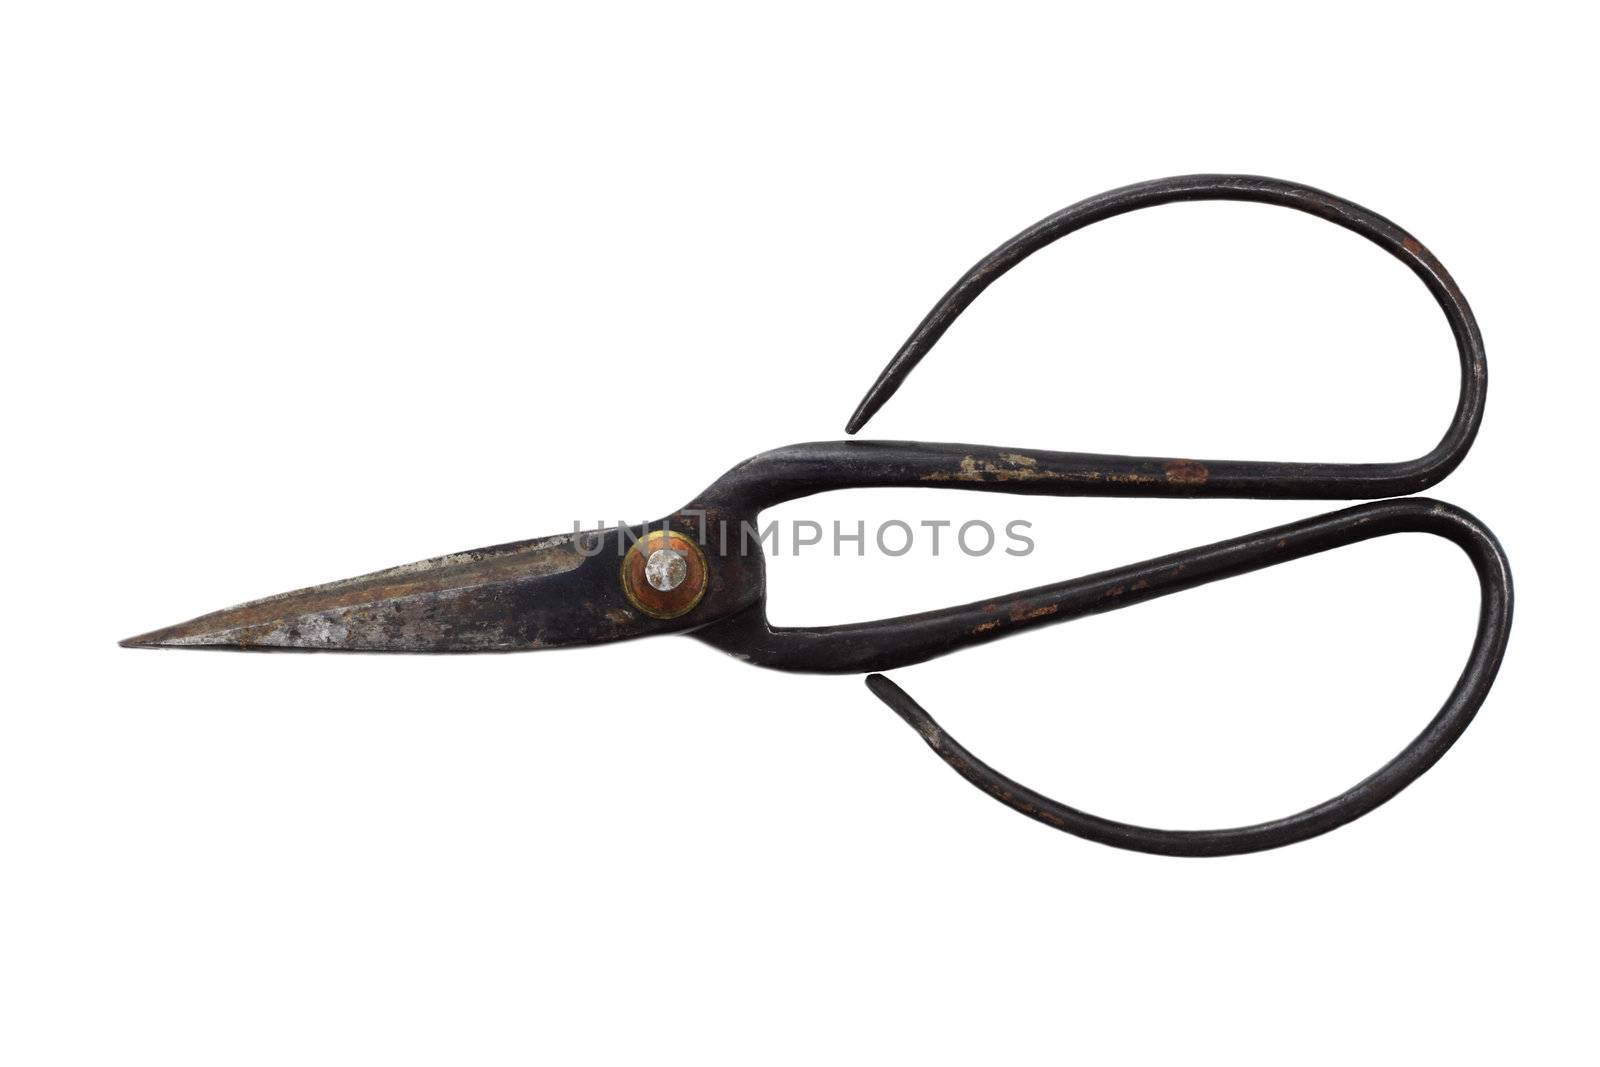 Traditional style antique metal Japanese Bonsai shears/scissors isolated on a white background.